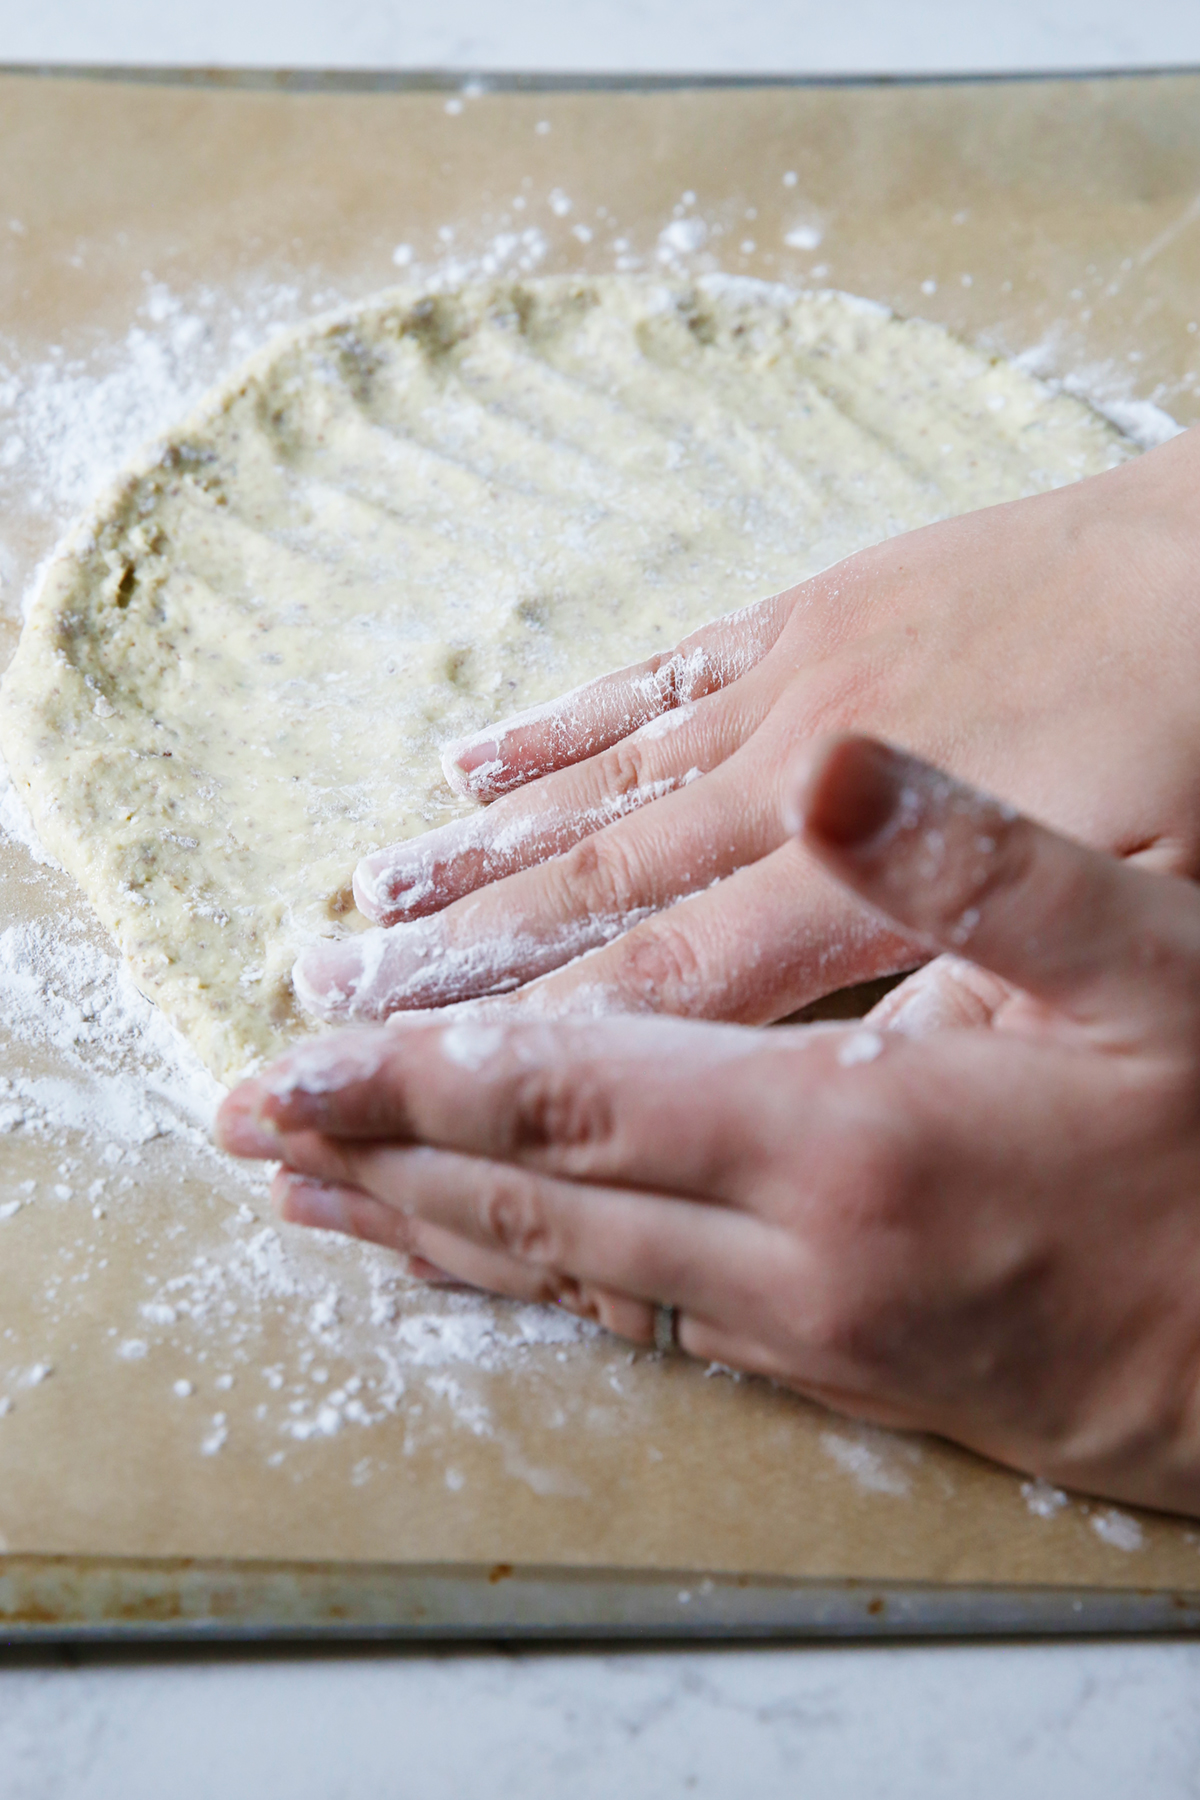 Patting out gluten free pizza dough